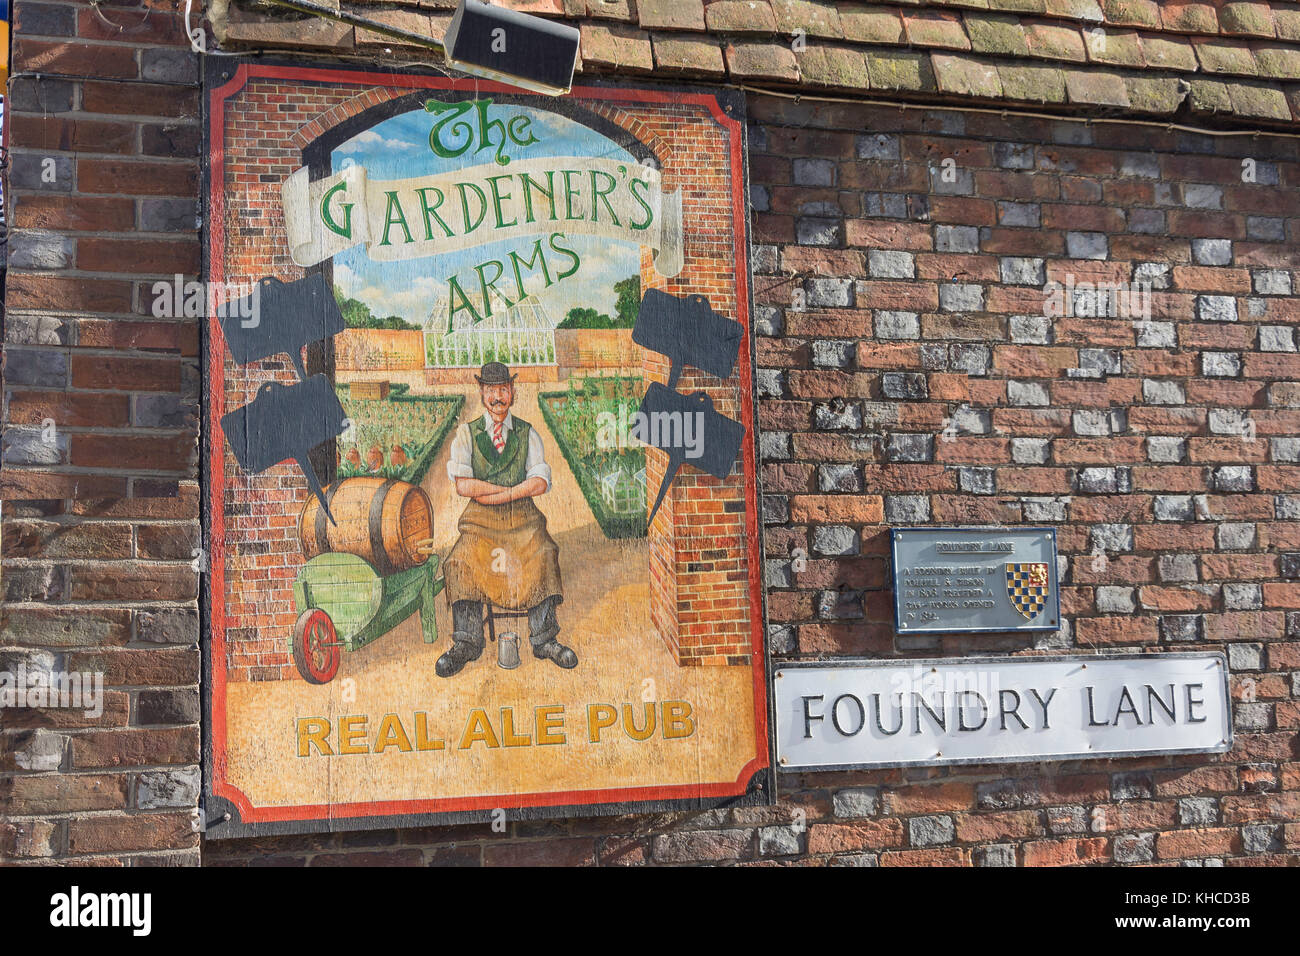 The Gardener's Arms Pub sign, Foundry Lane, Lewes, East Sussex, England, United Kingdom Stock Photo